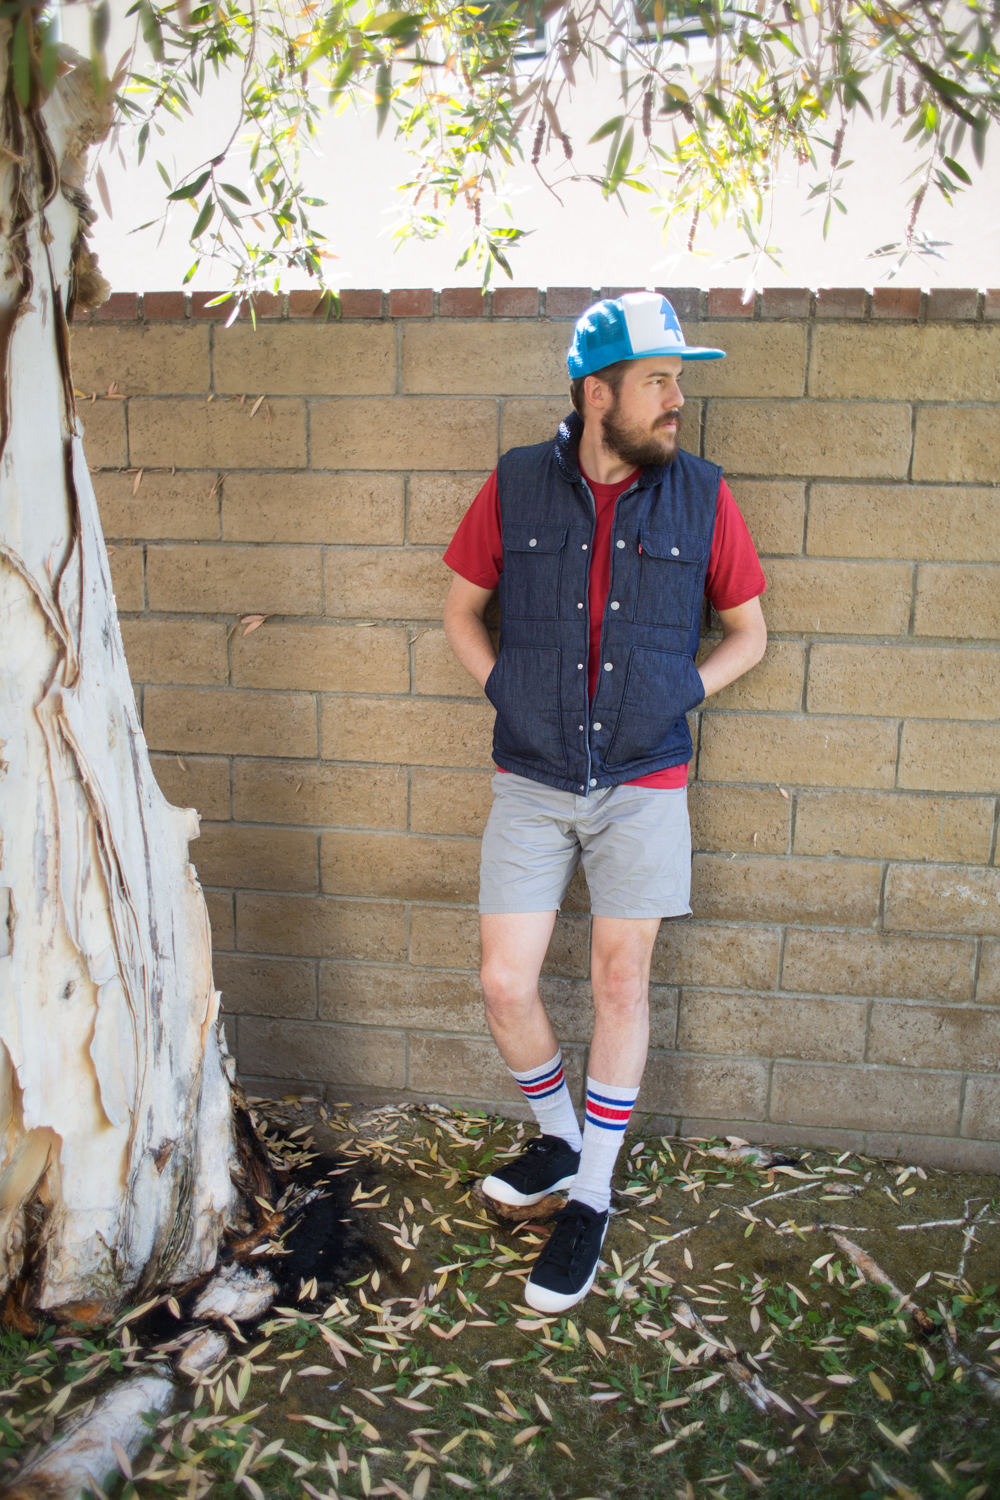 Dipper Pines From Gravity Falls Disney Bounding Outfit